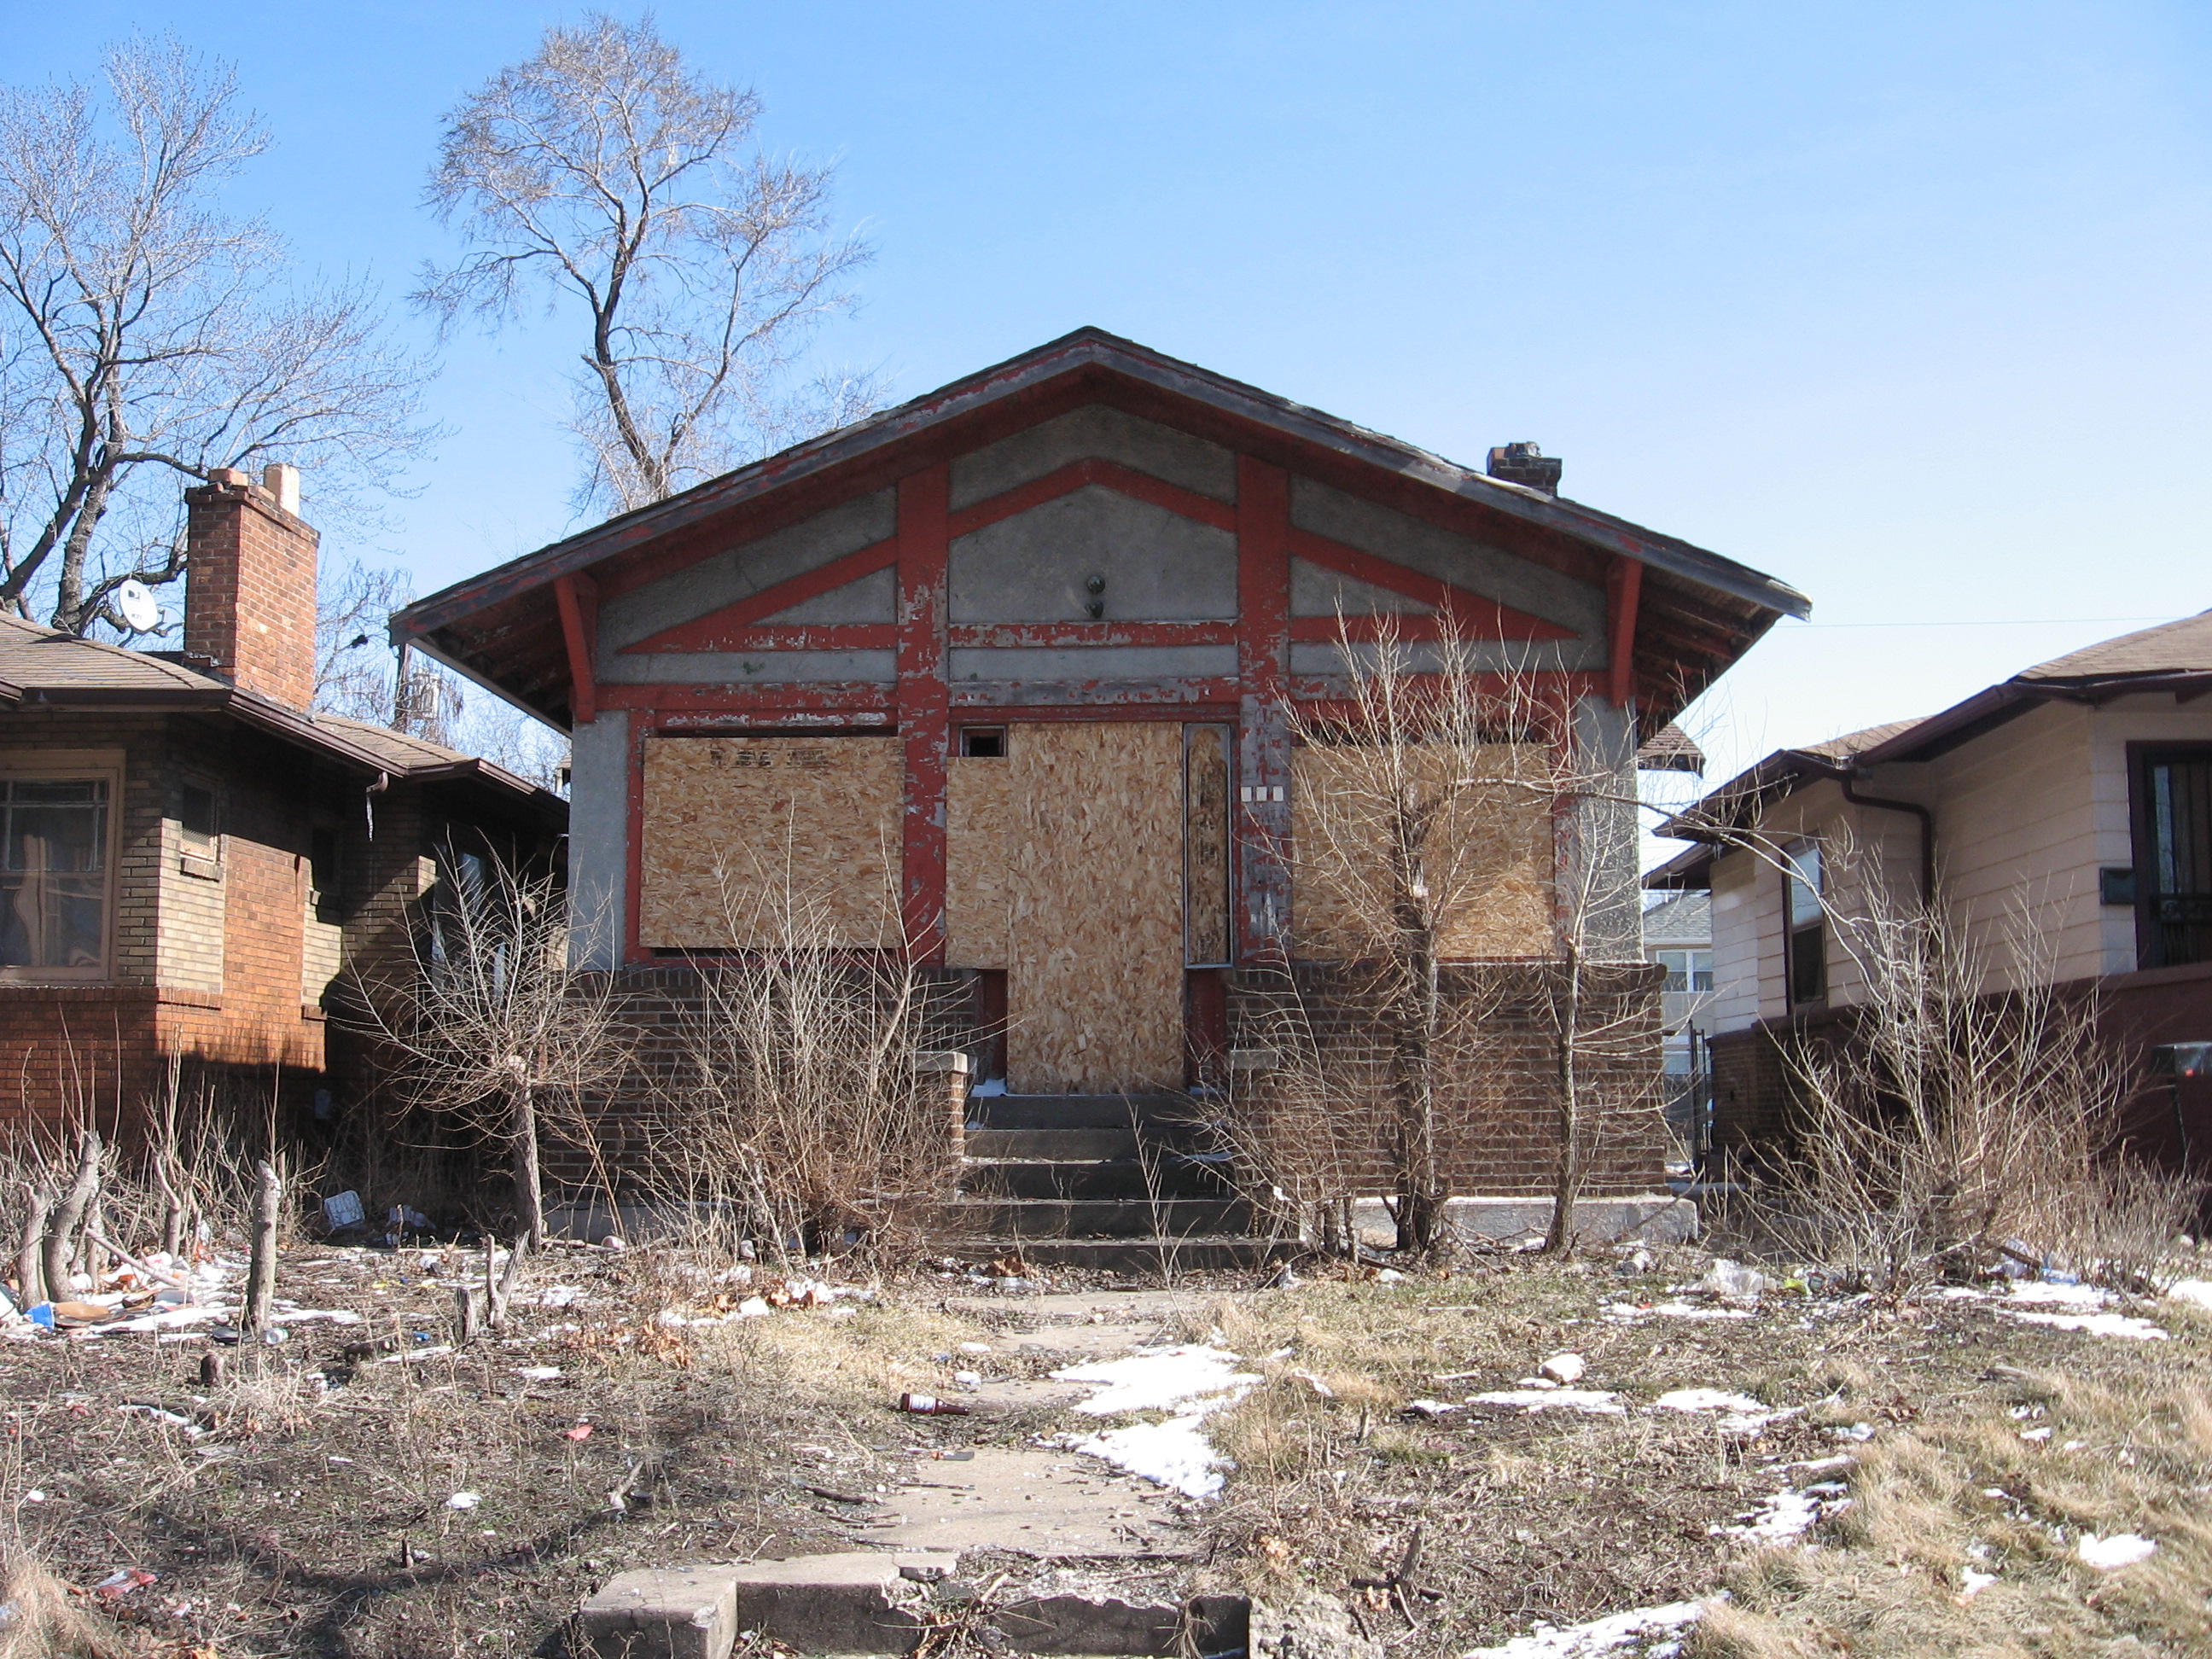 File:Boarded up house in Gary Indiana.jpg - Wikimedia Commons